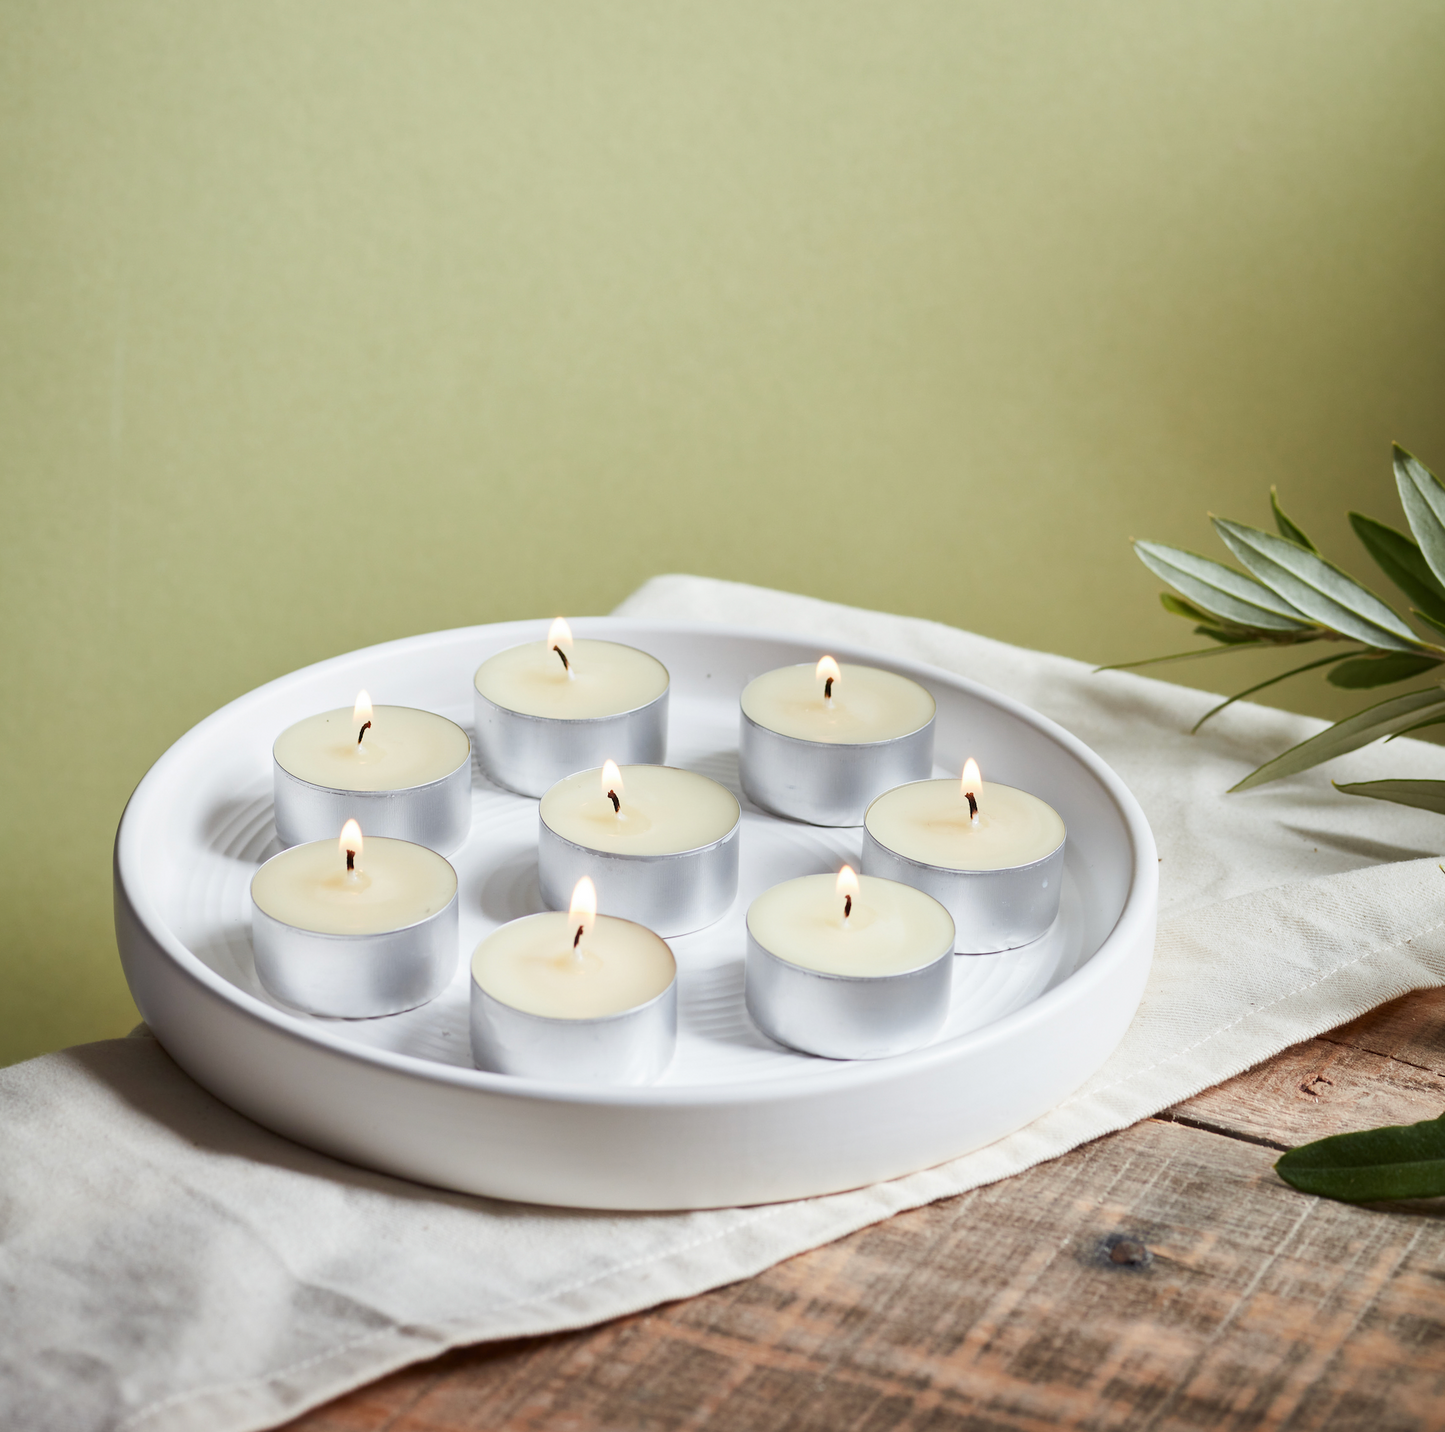 St Eval Tranquility Scented Tealights, (Set Of 9)